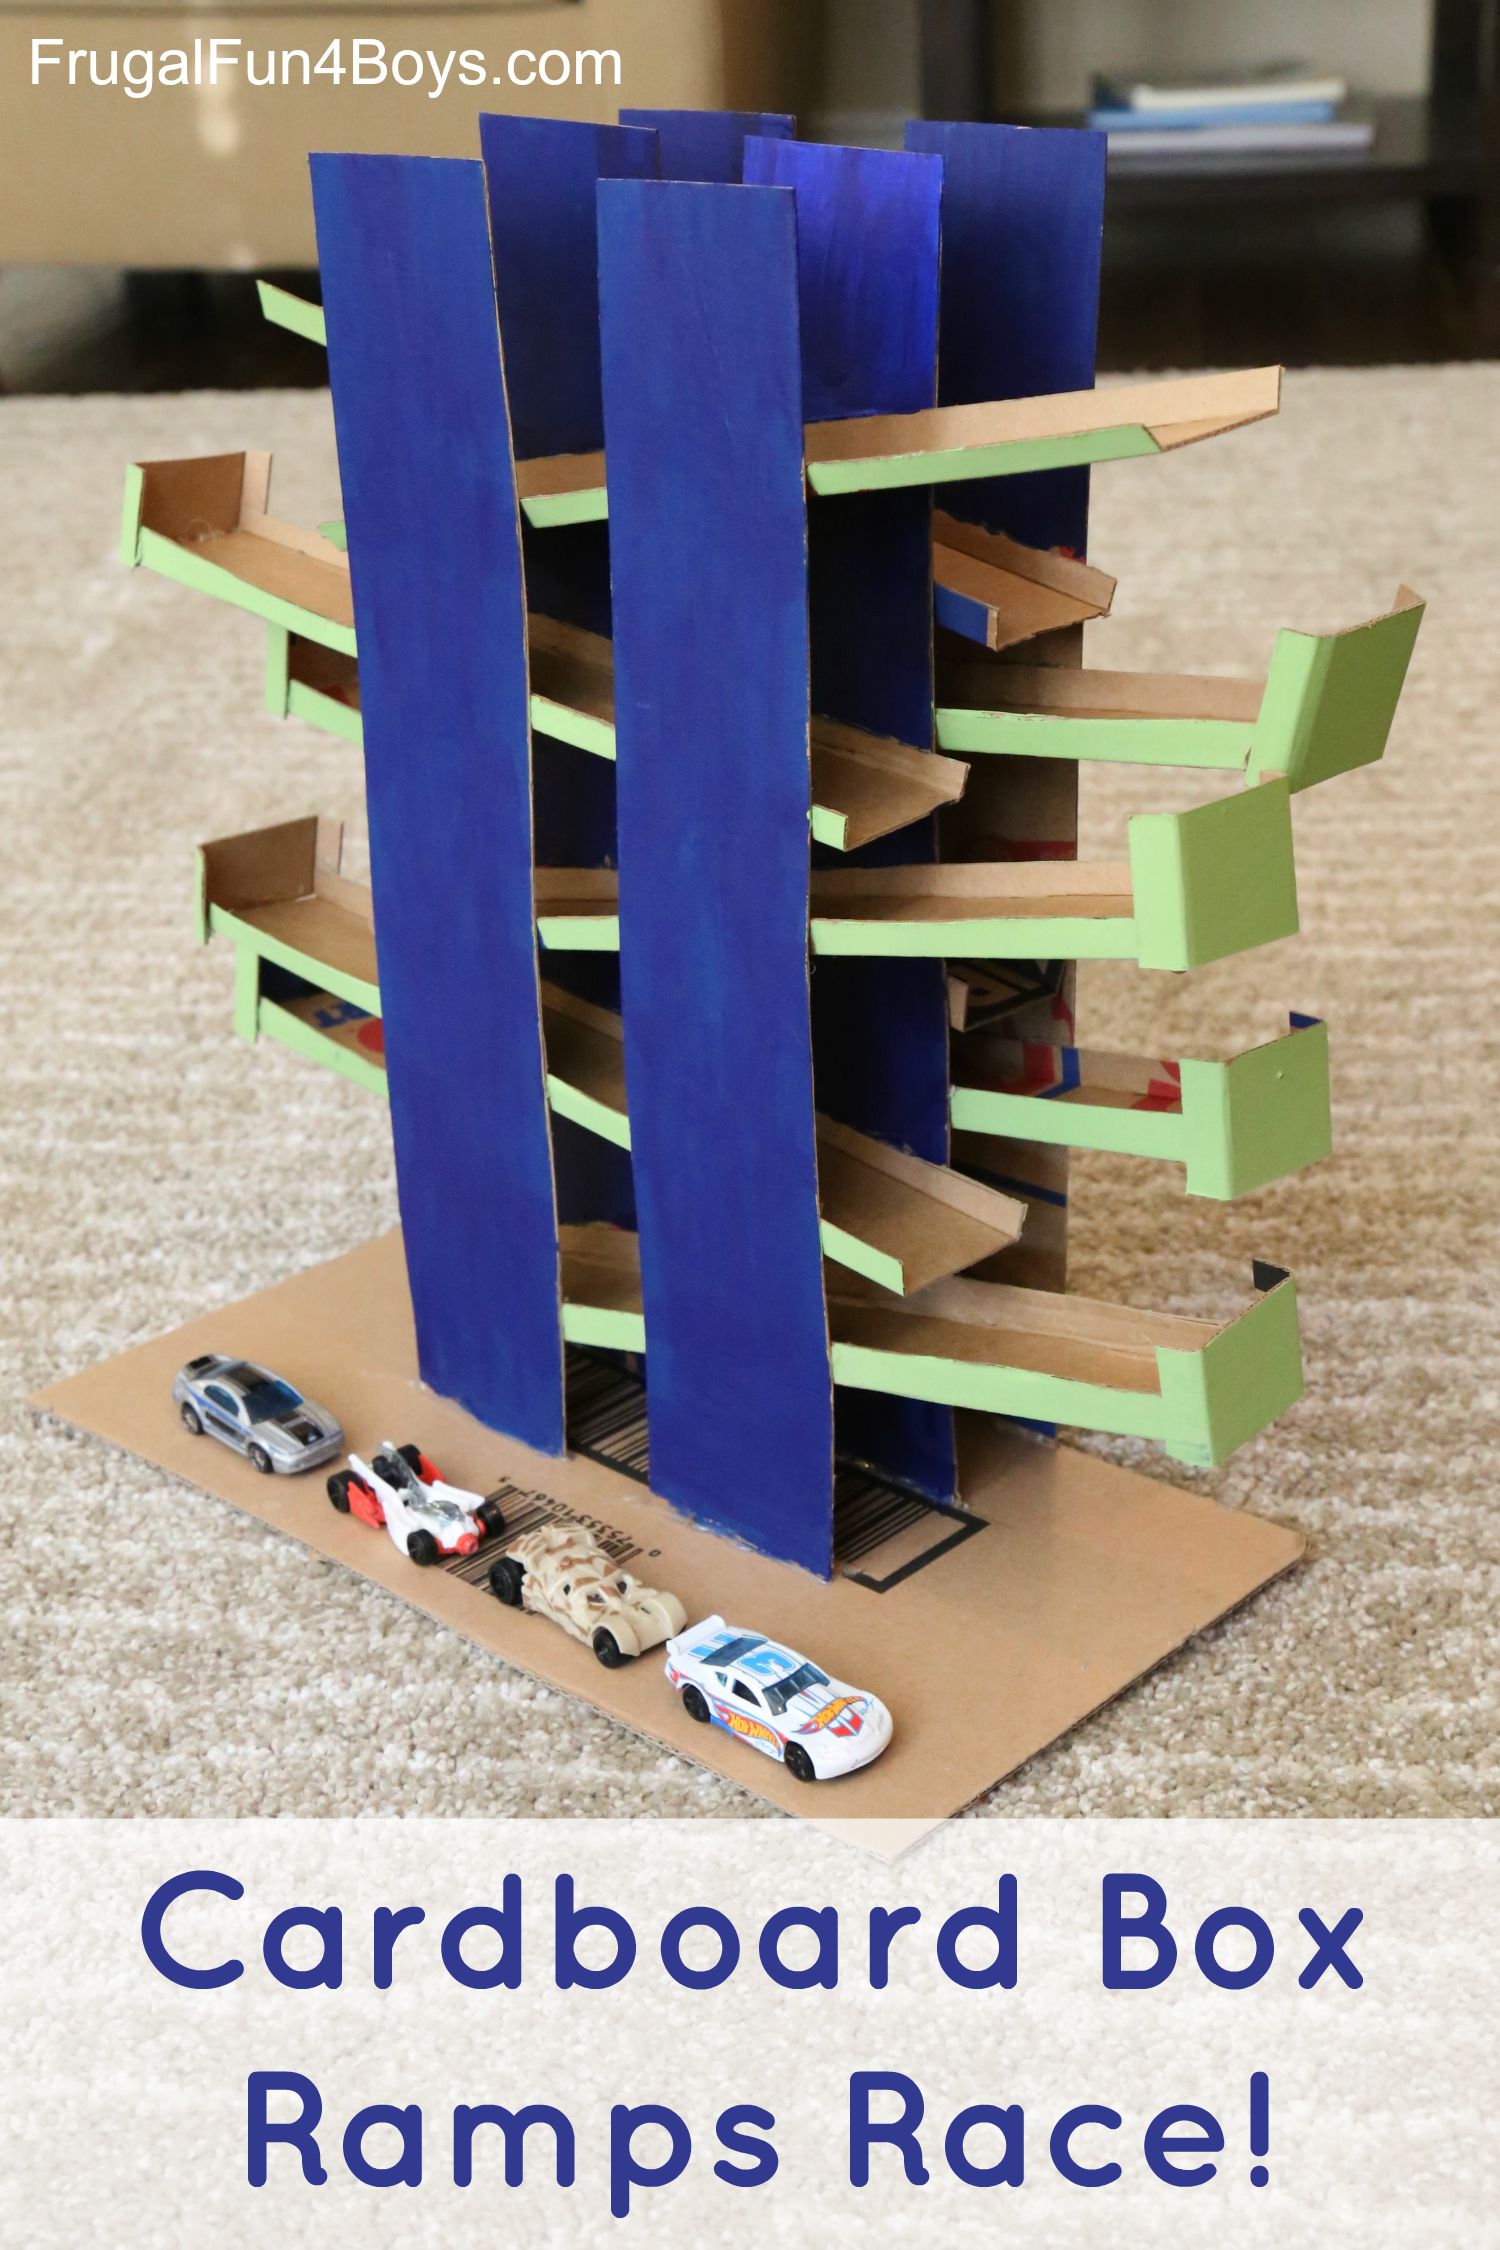 Cardboard Box Ramps Race - DIY Toy for Hot Wheels Cars